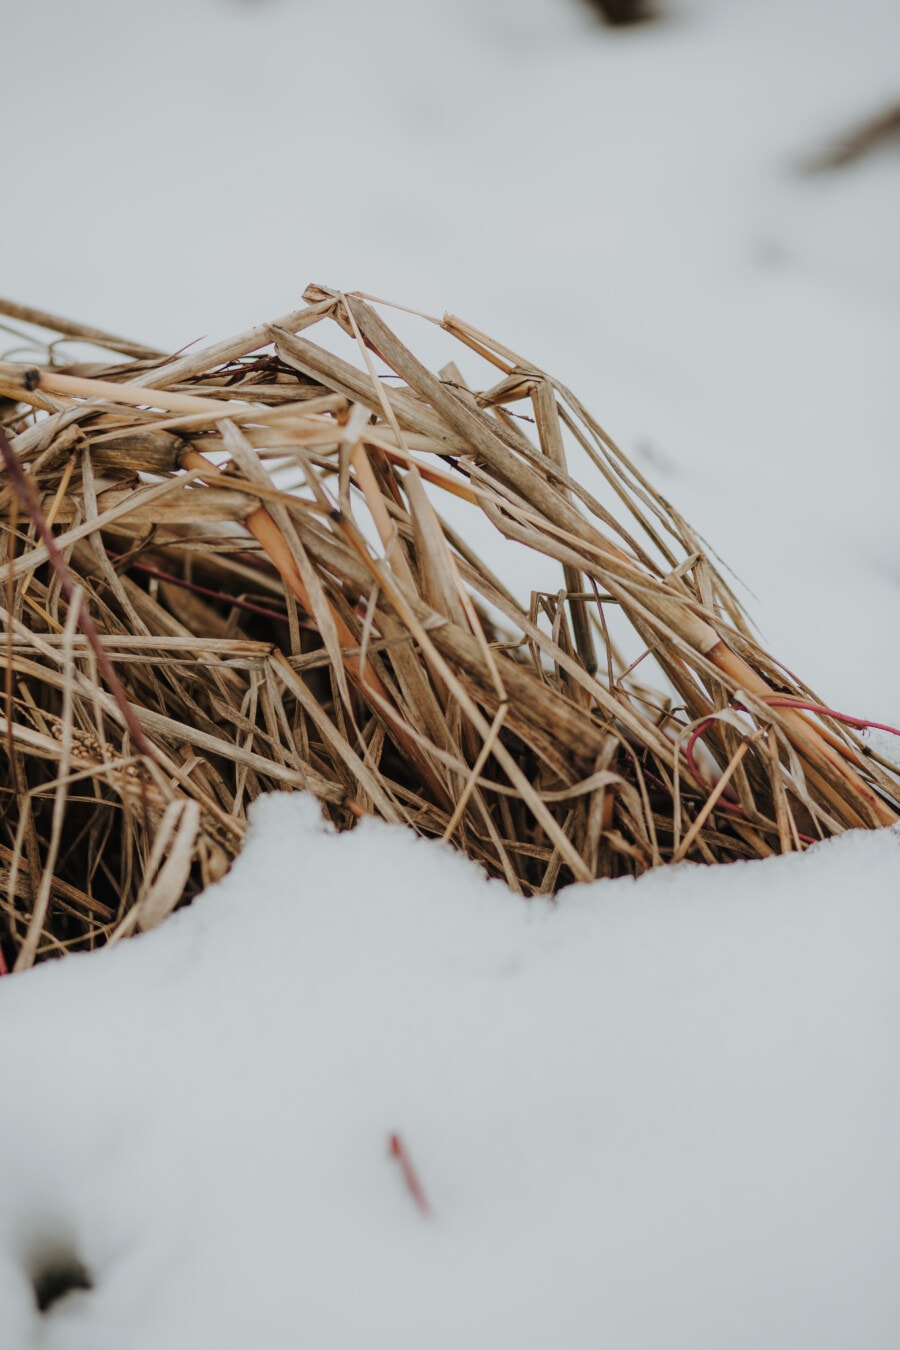 snowy, reed grass, frozen, snow, frost, frosty, reeds, winter, wood, nature